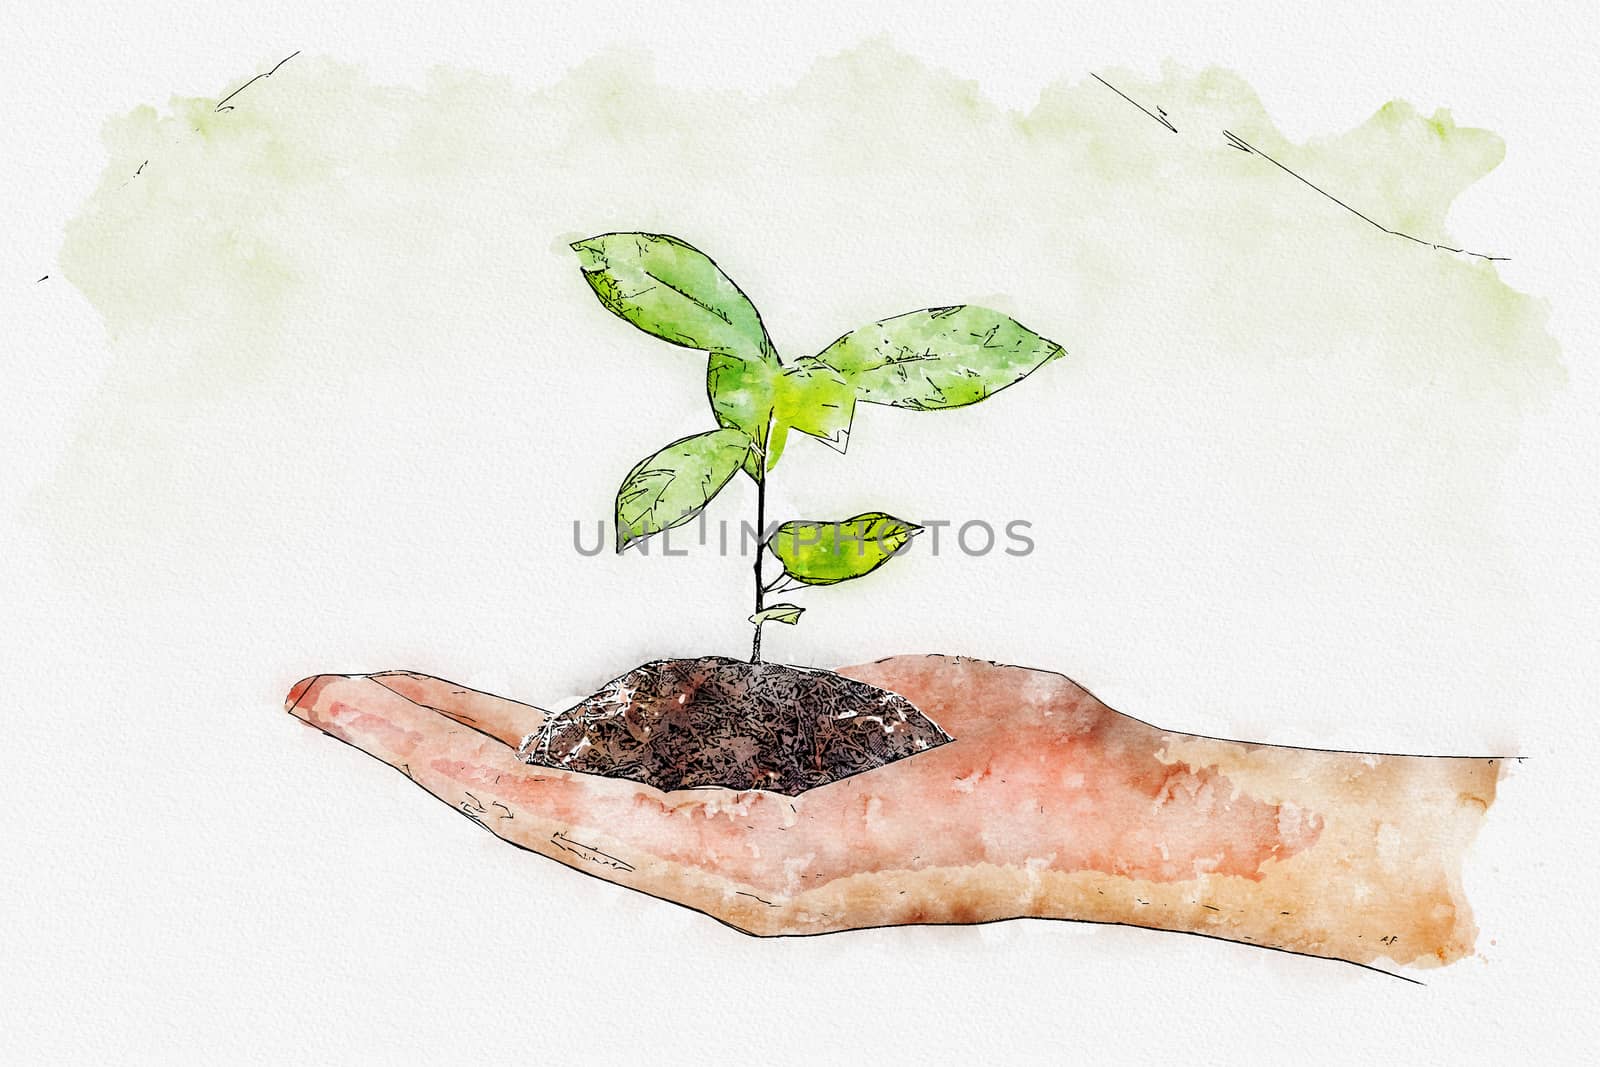 Watercolor of plant in the hand on green background by pkproject